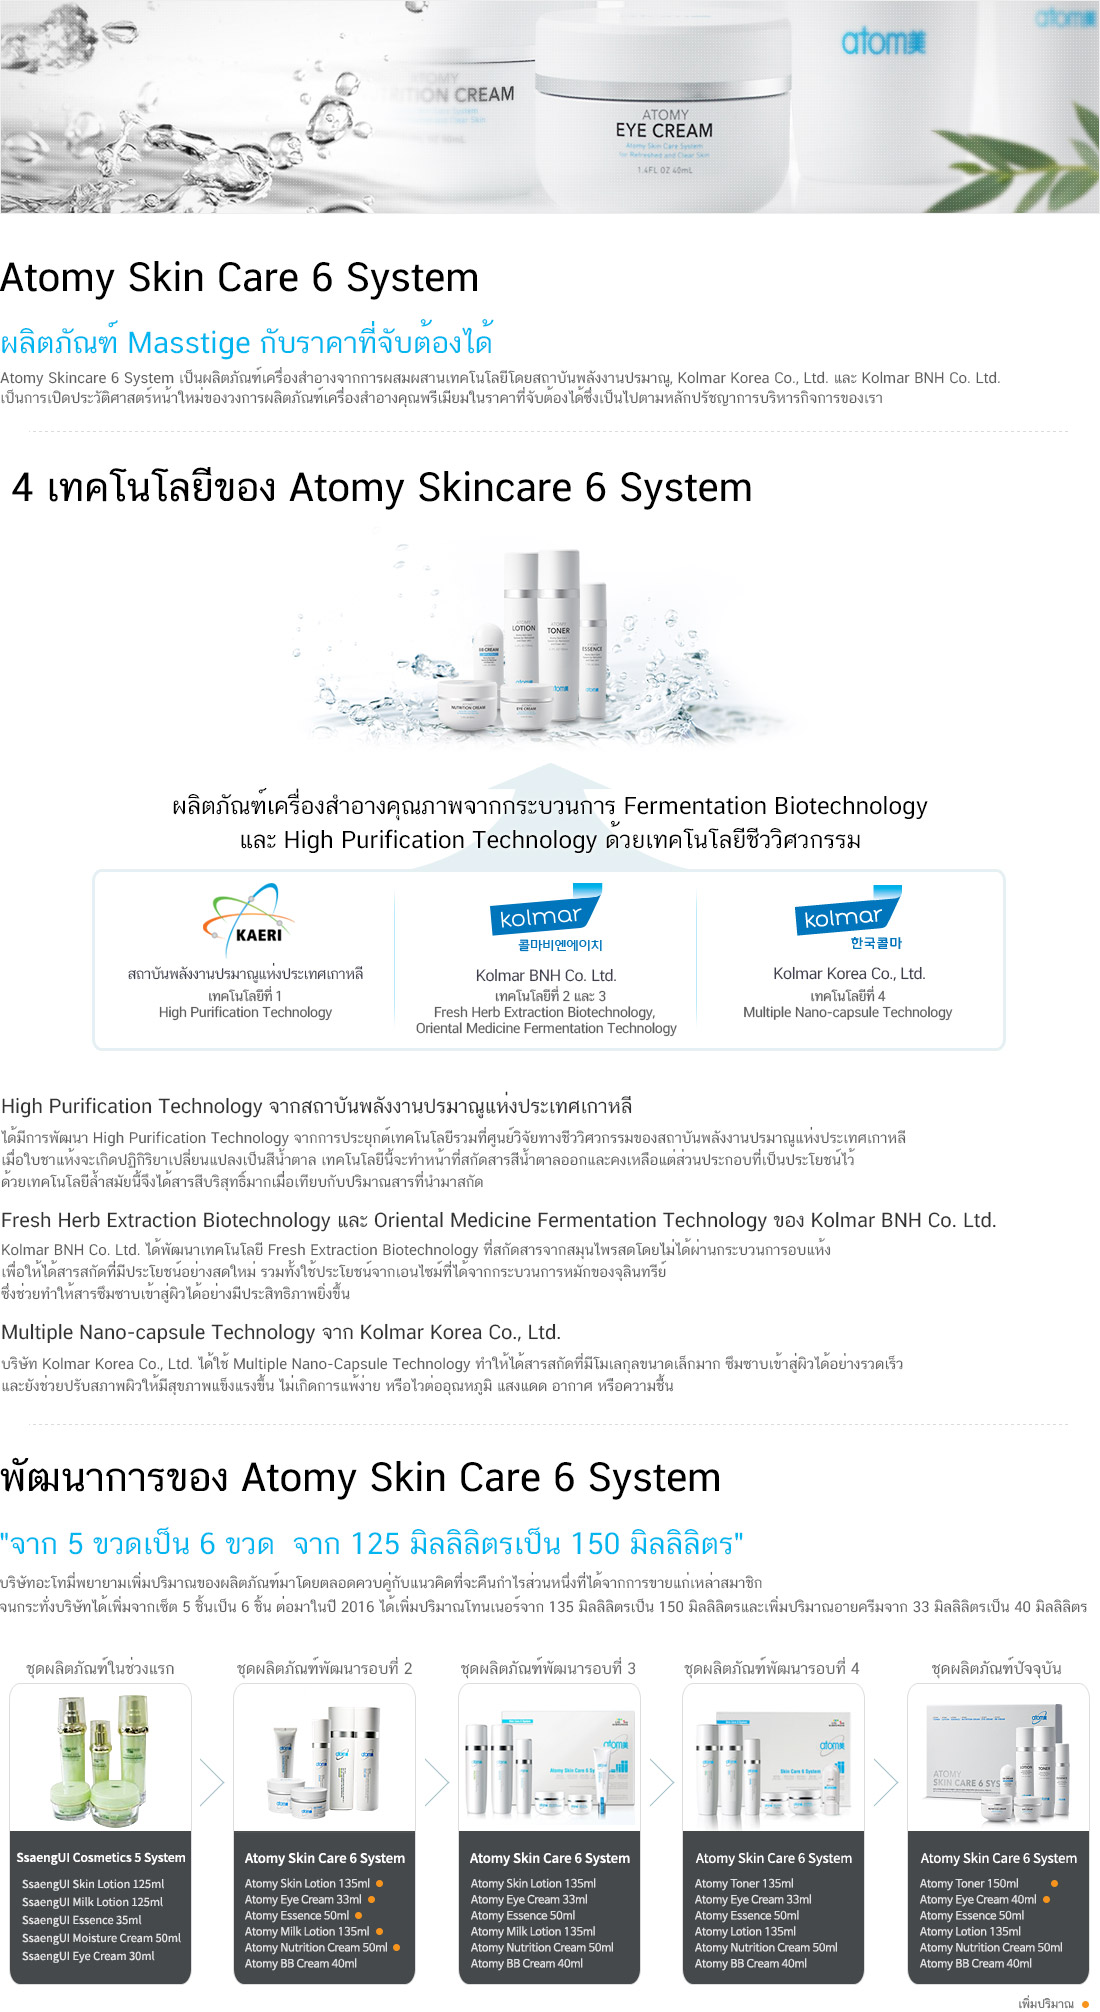 Story of Atomy Skin Care 6 System